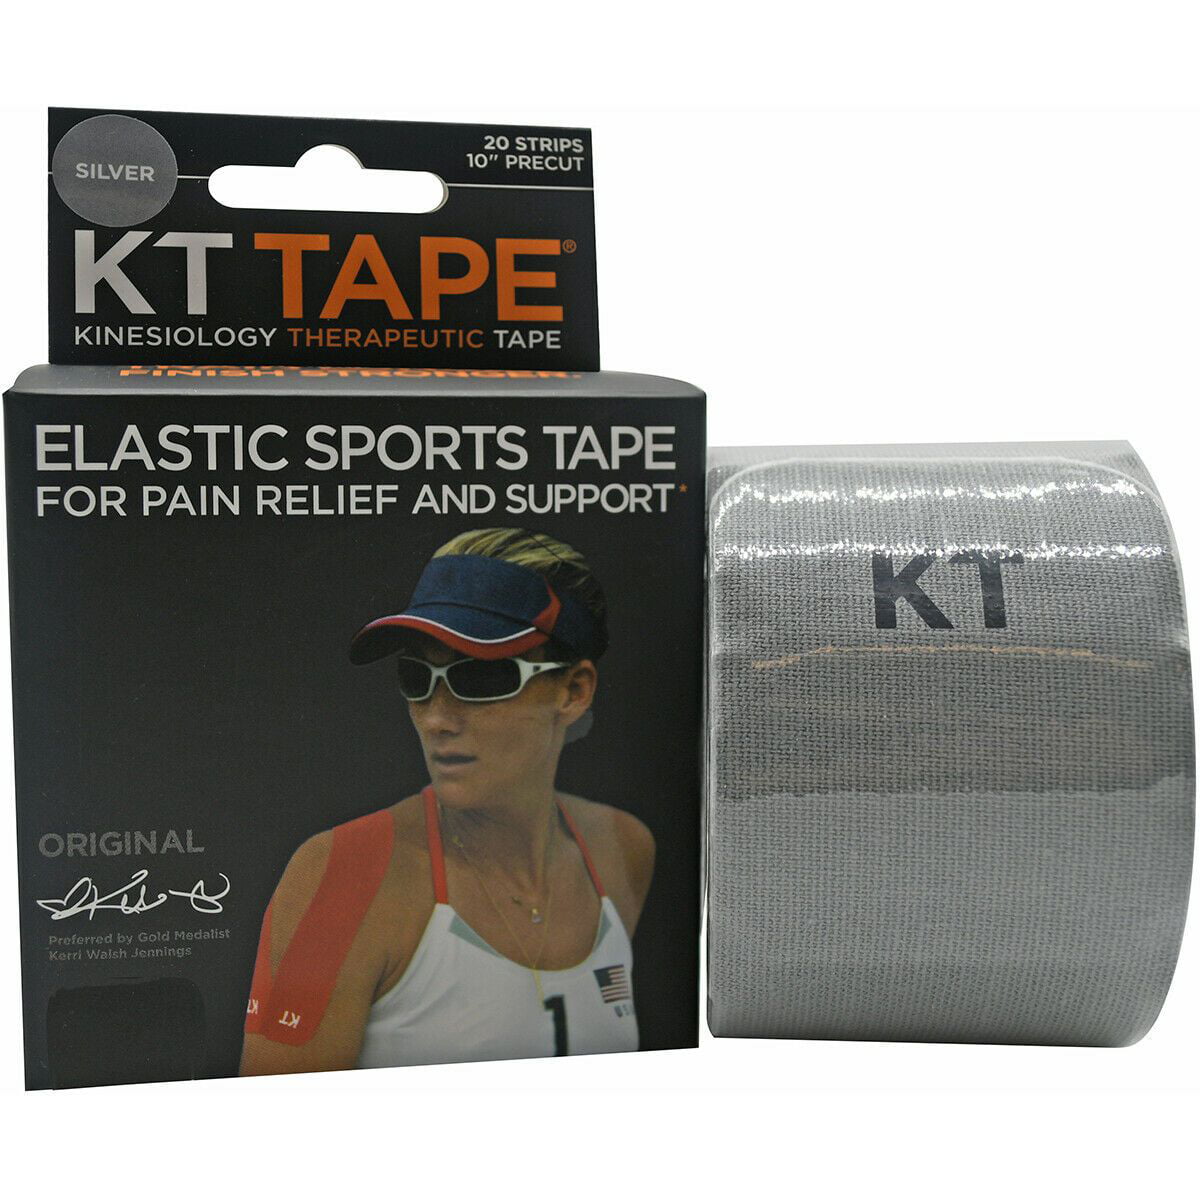 Gold 20 Strips KT Tape Cotton 10/" Precut Kinesiology Therapeutic Sports Roll